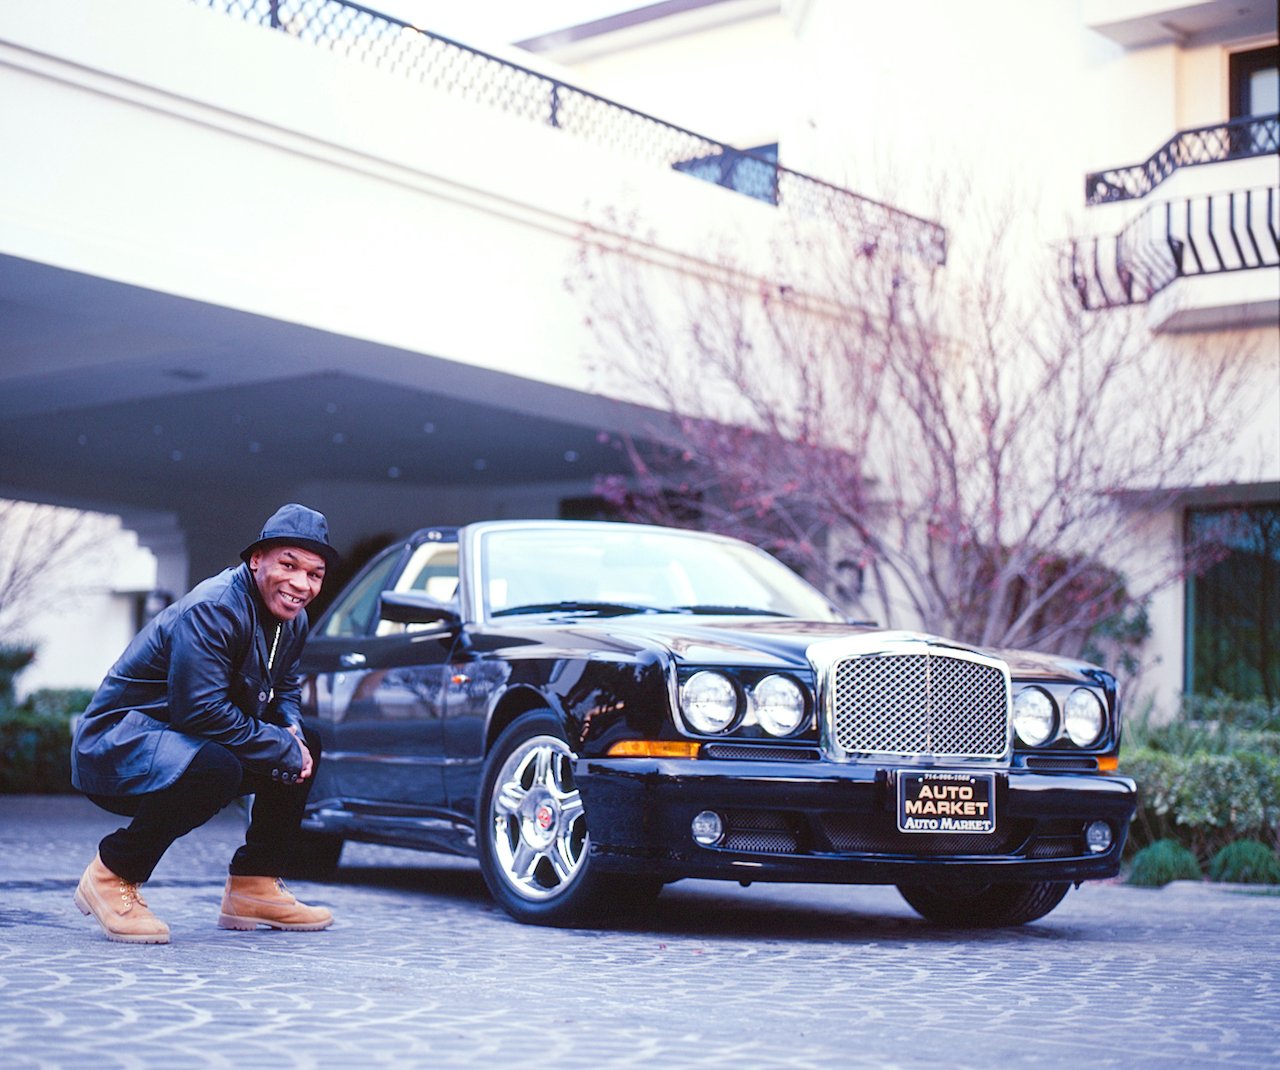 Mike Tyson Gave Ed Lover a Bentley After a Wild Night Out, But His